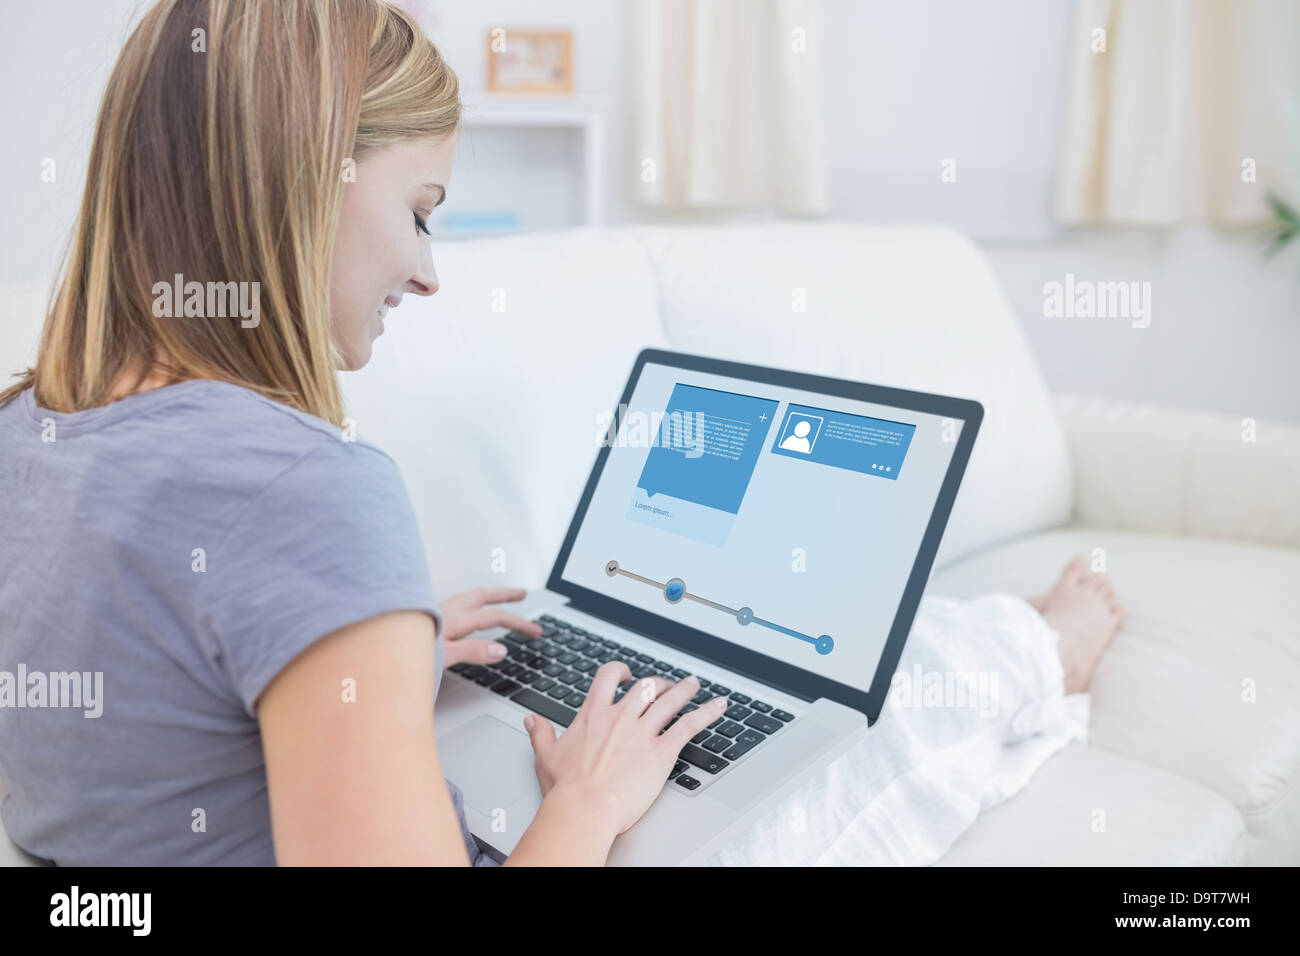 Woman sitting on sofa and checking her social media profile Stock Photo